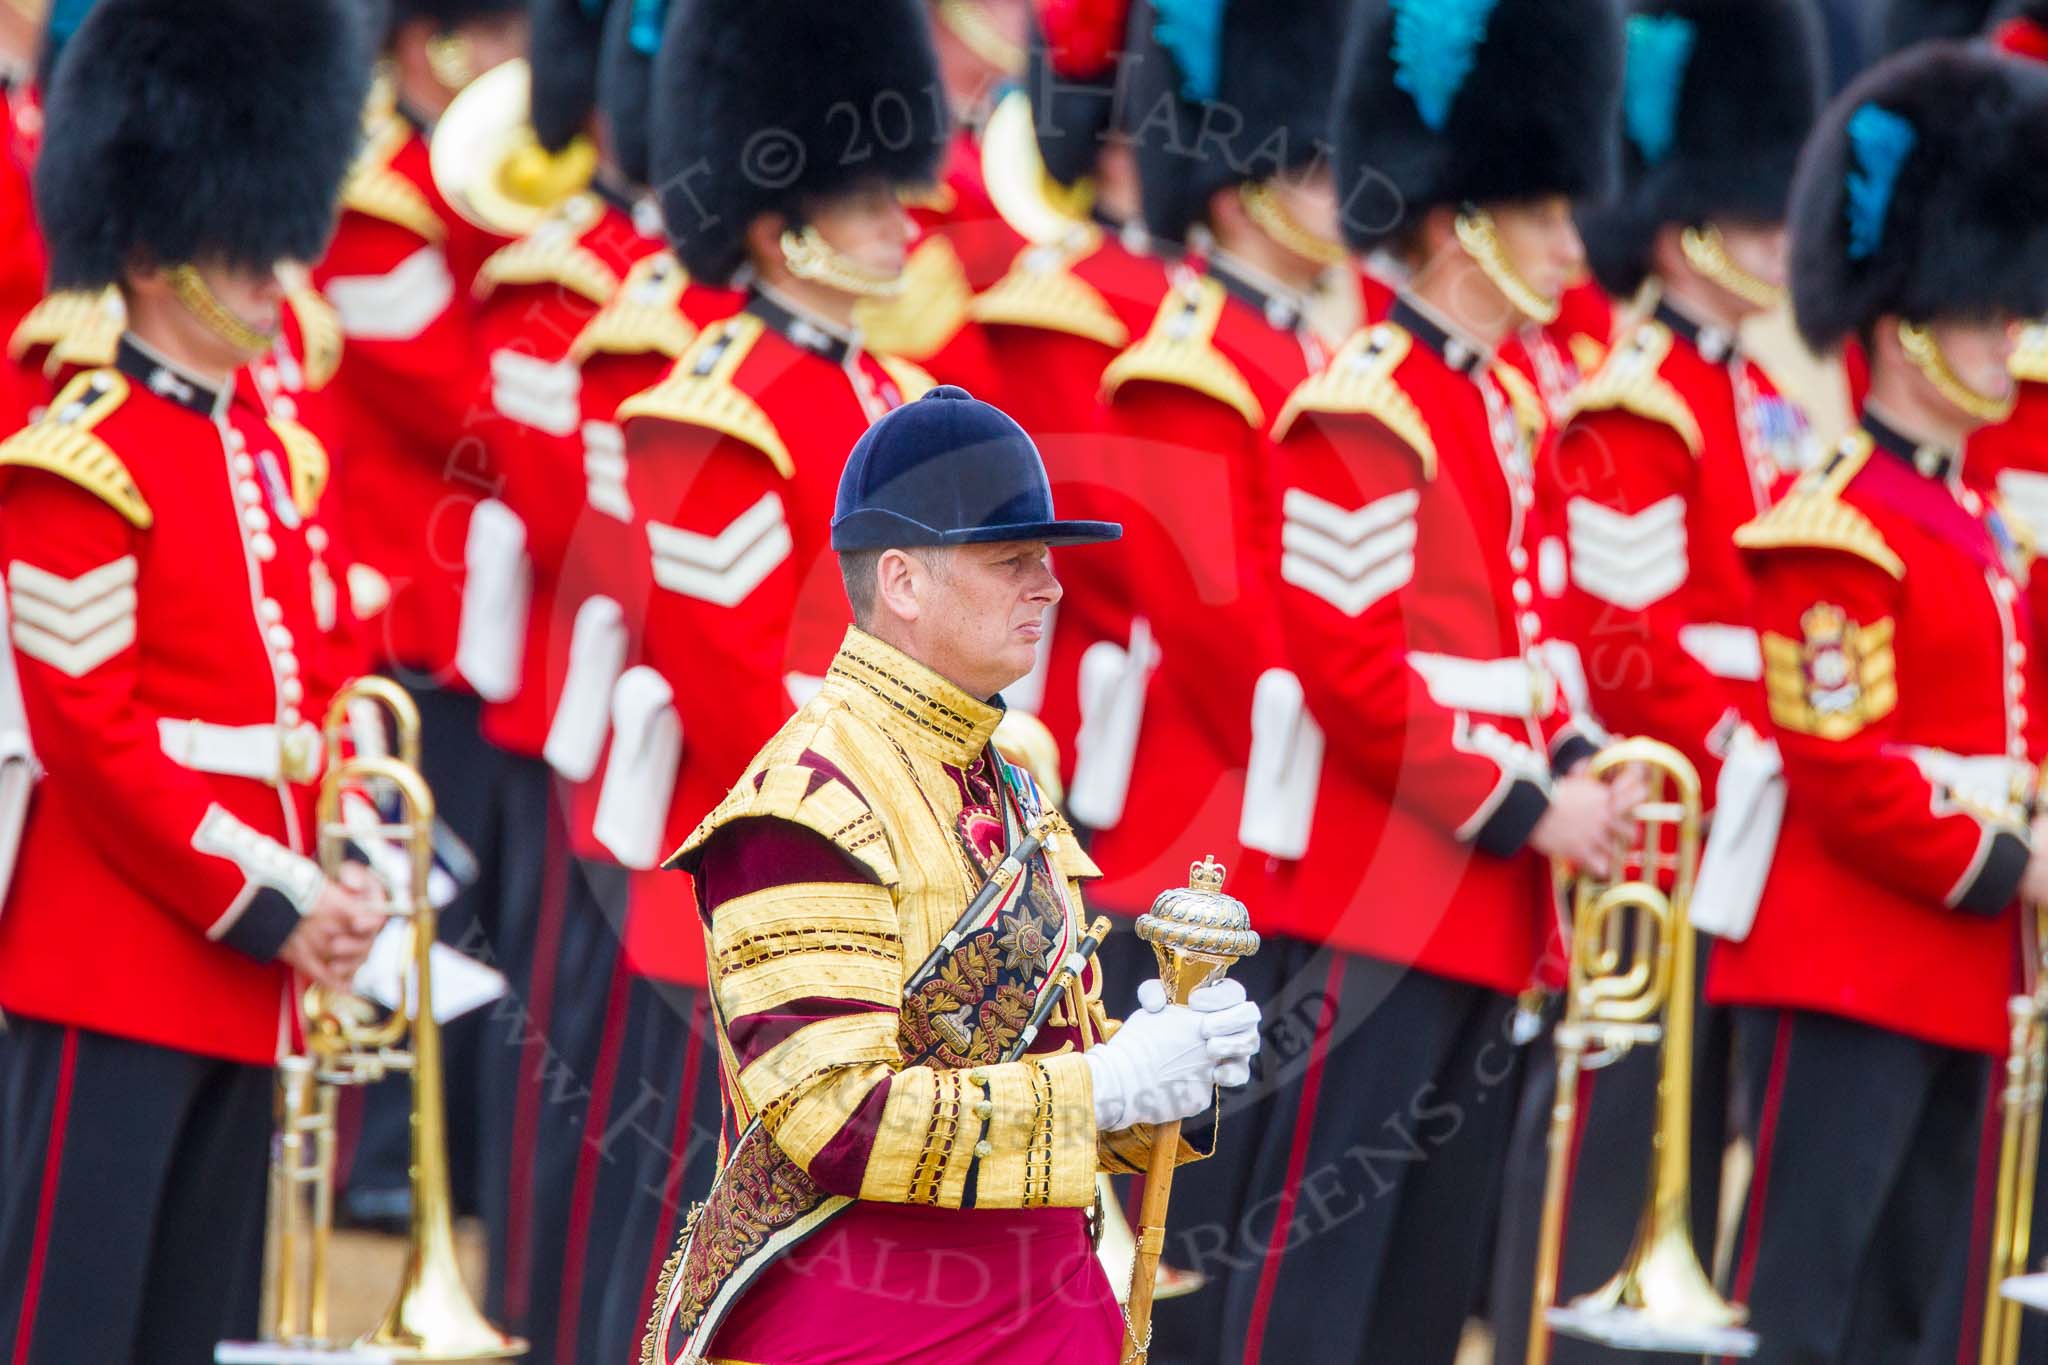 Trooping the Colour 2014.
Horse Guards Parade, Westminster,
London SW1A,

United Kingdom,
on 14 June 2014 at 10:33, image #207